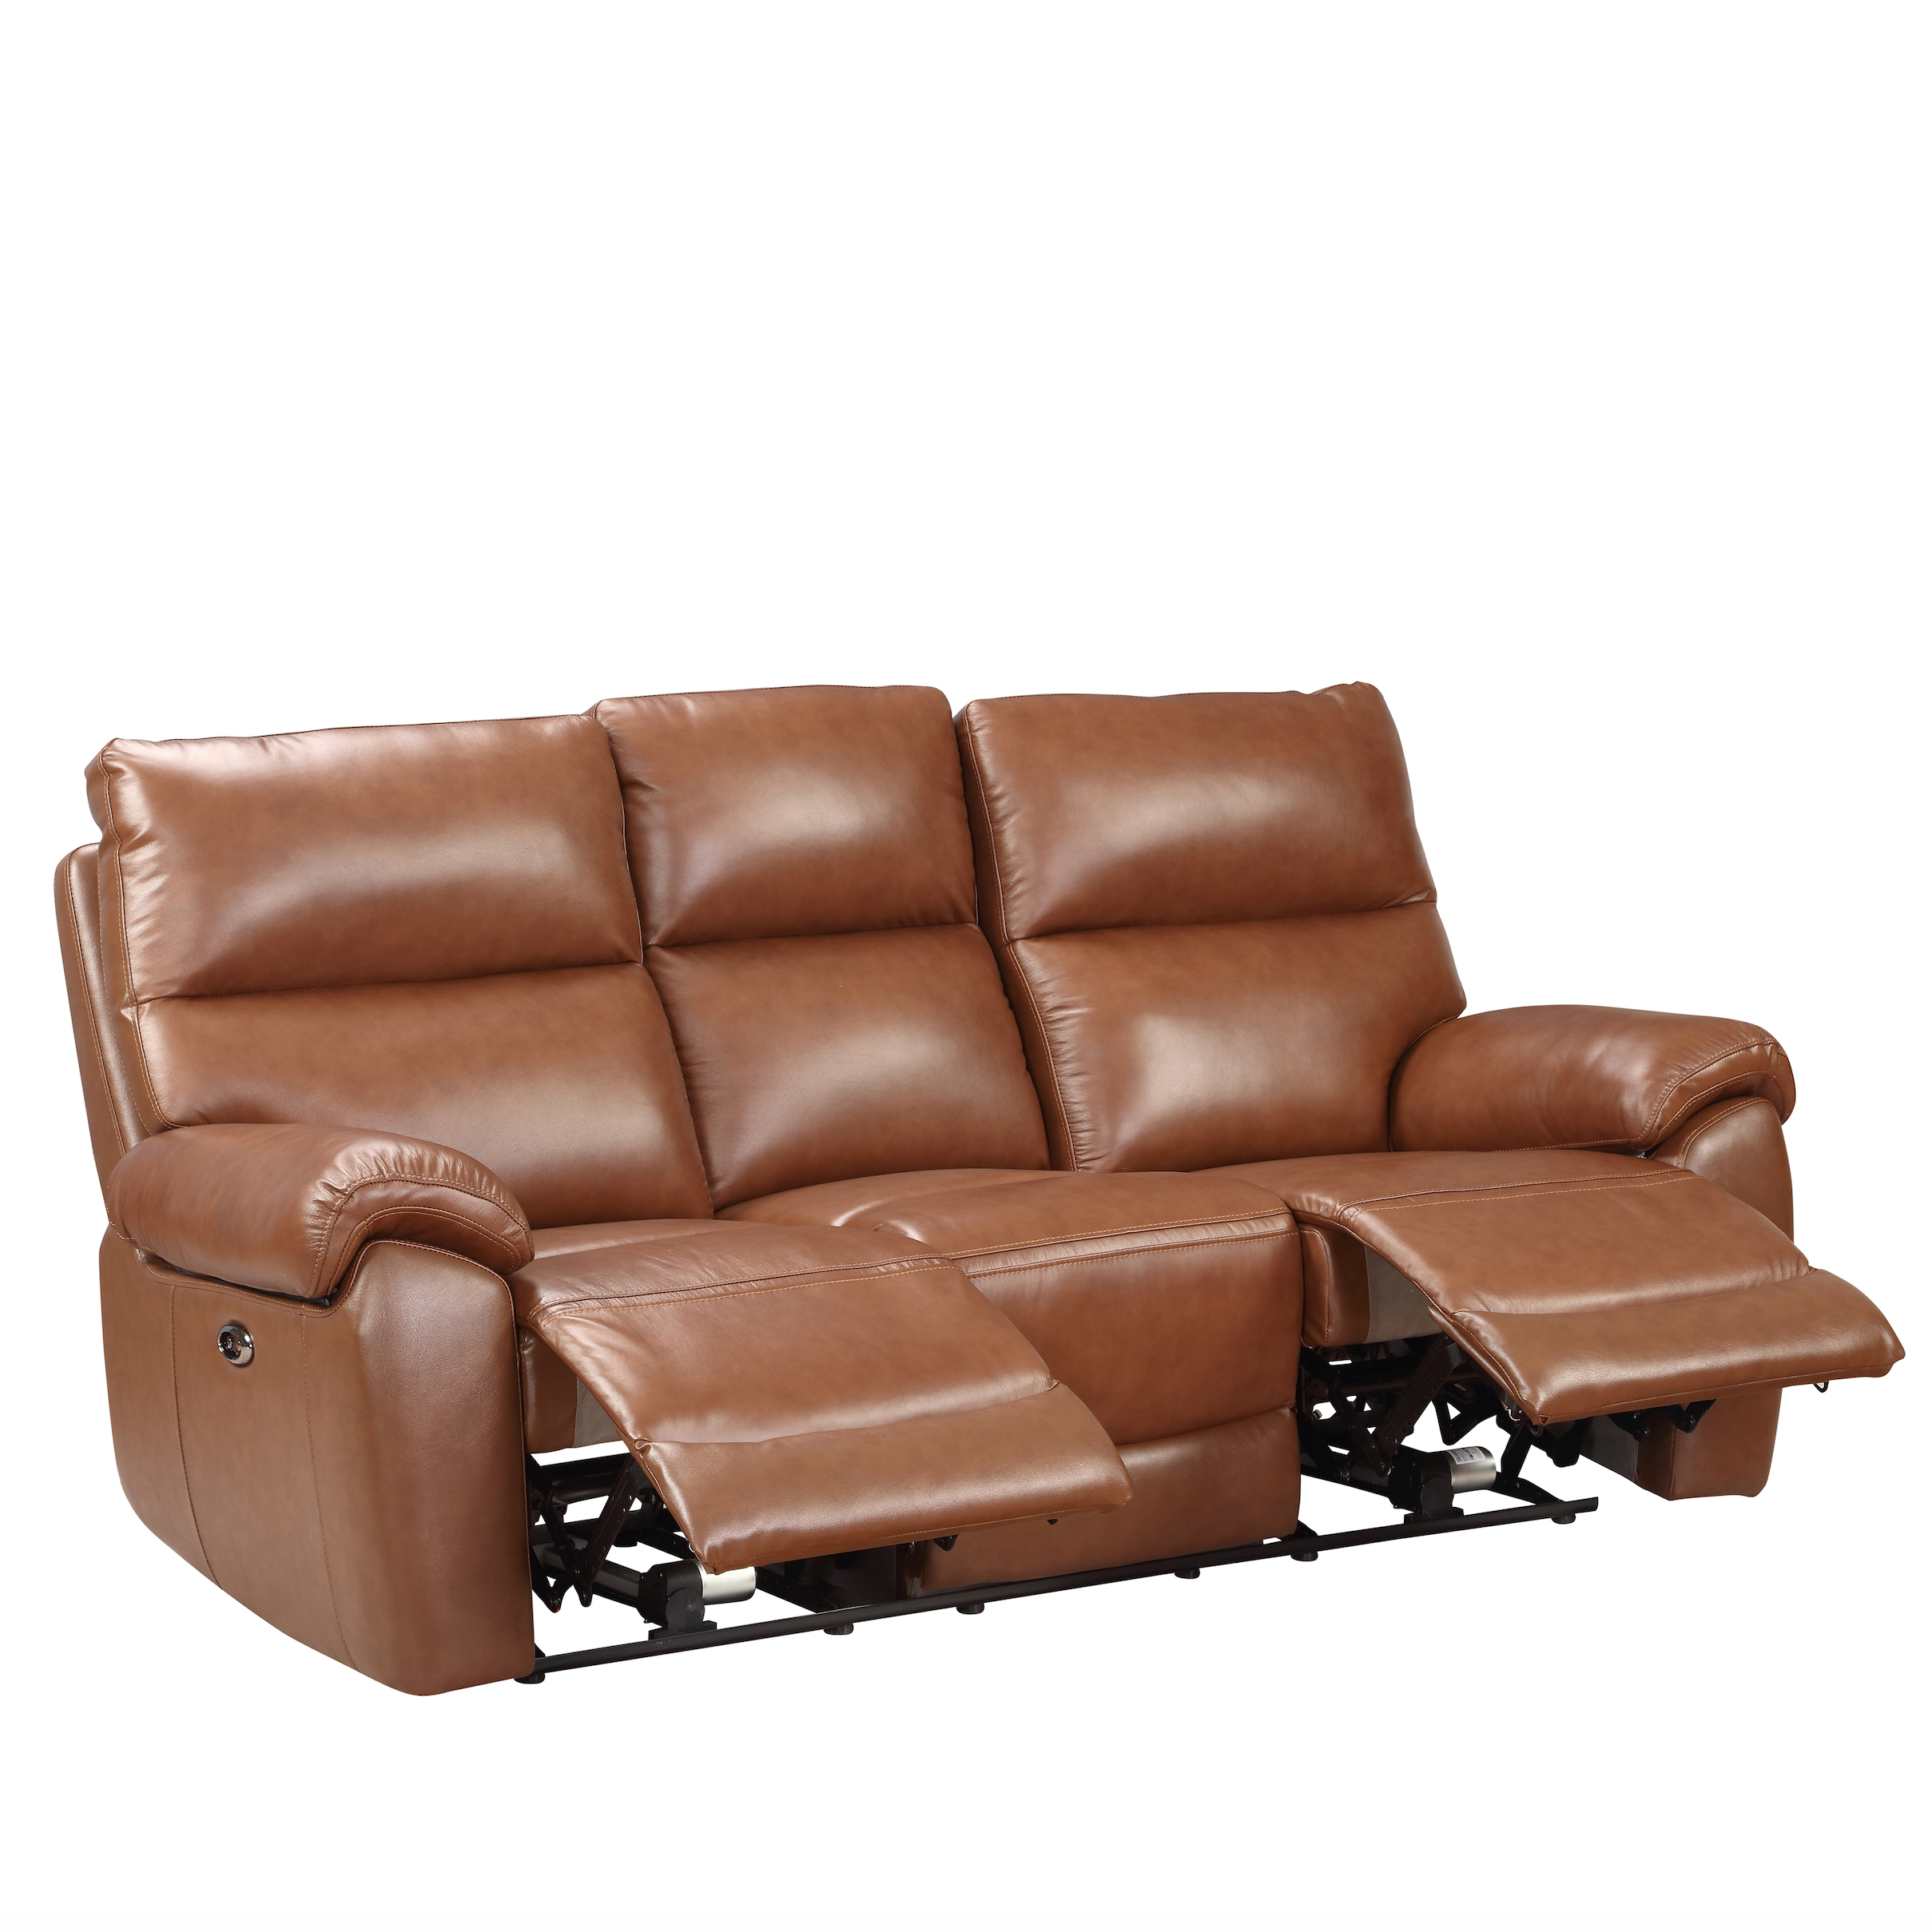 Rocco 3 Seater Power Recliner Chestnut Leather